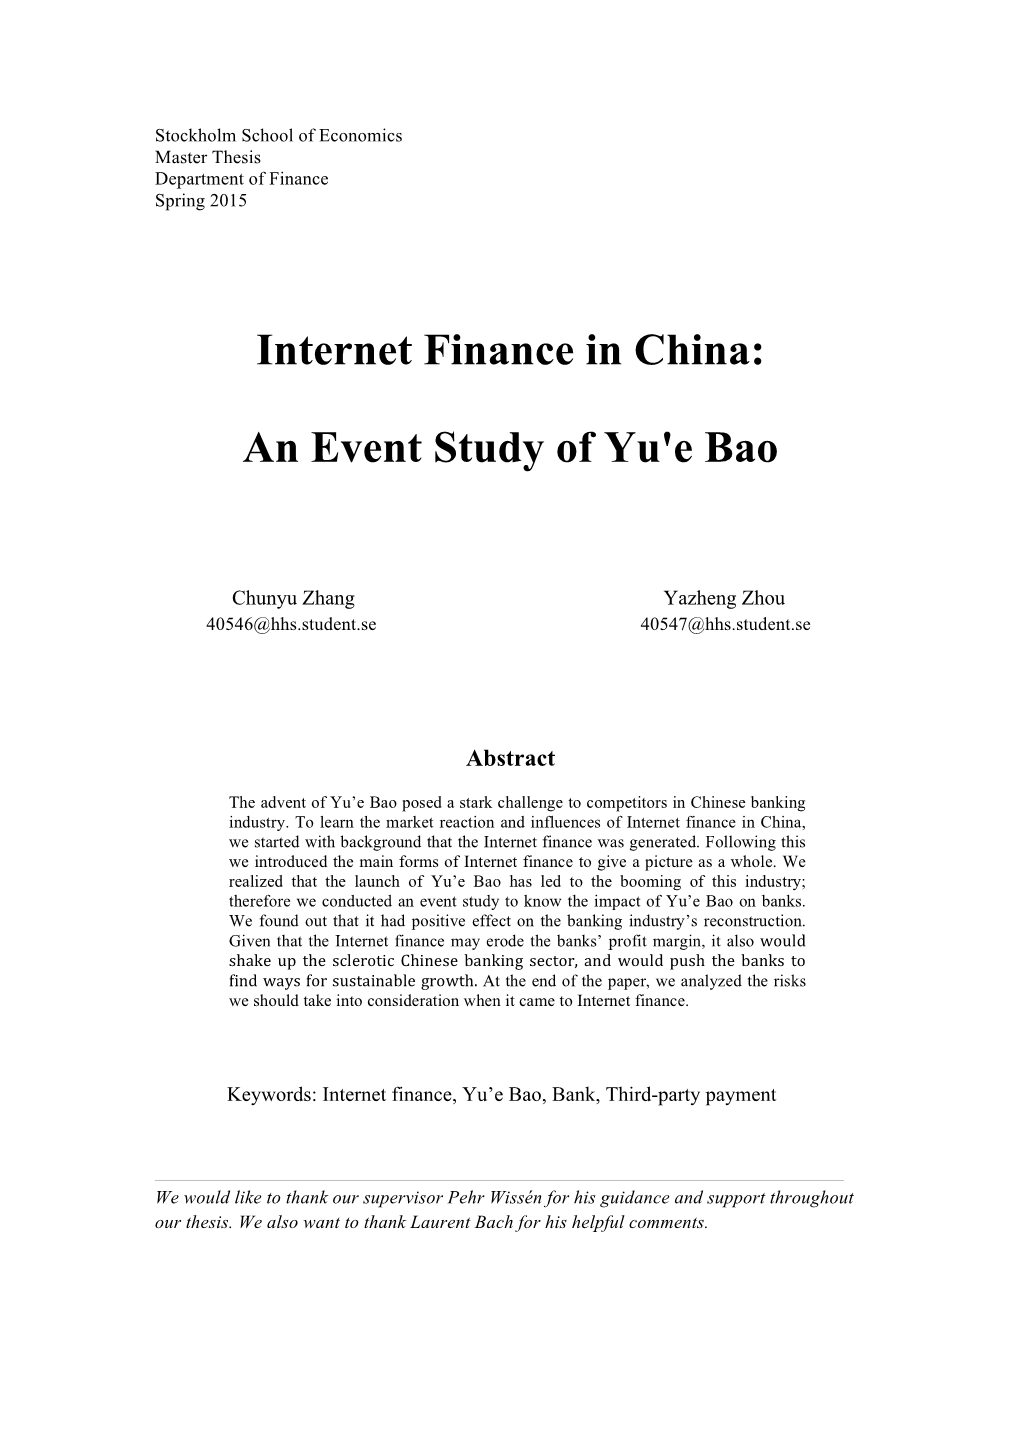 Internet Finance in China: an Event Study of Yu'e